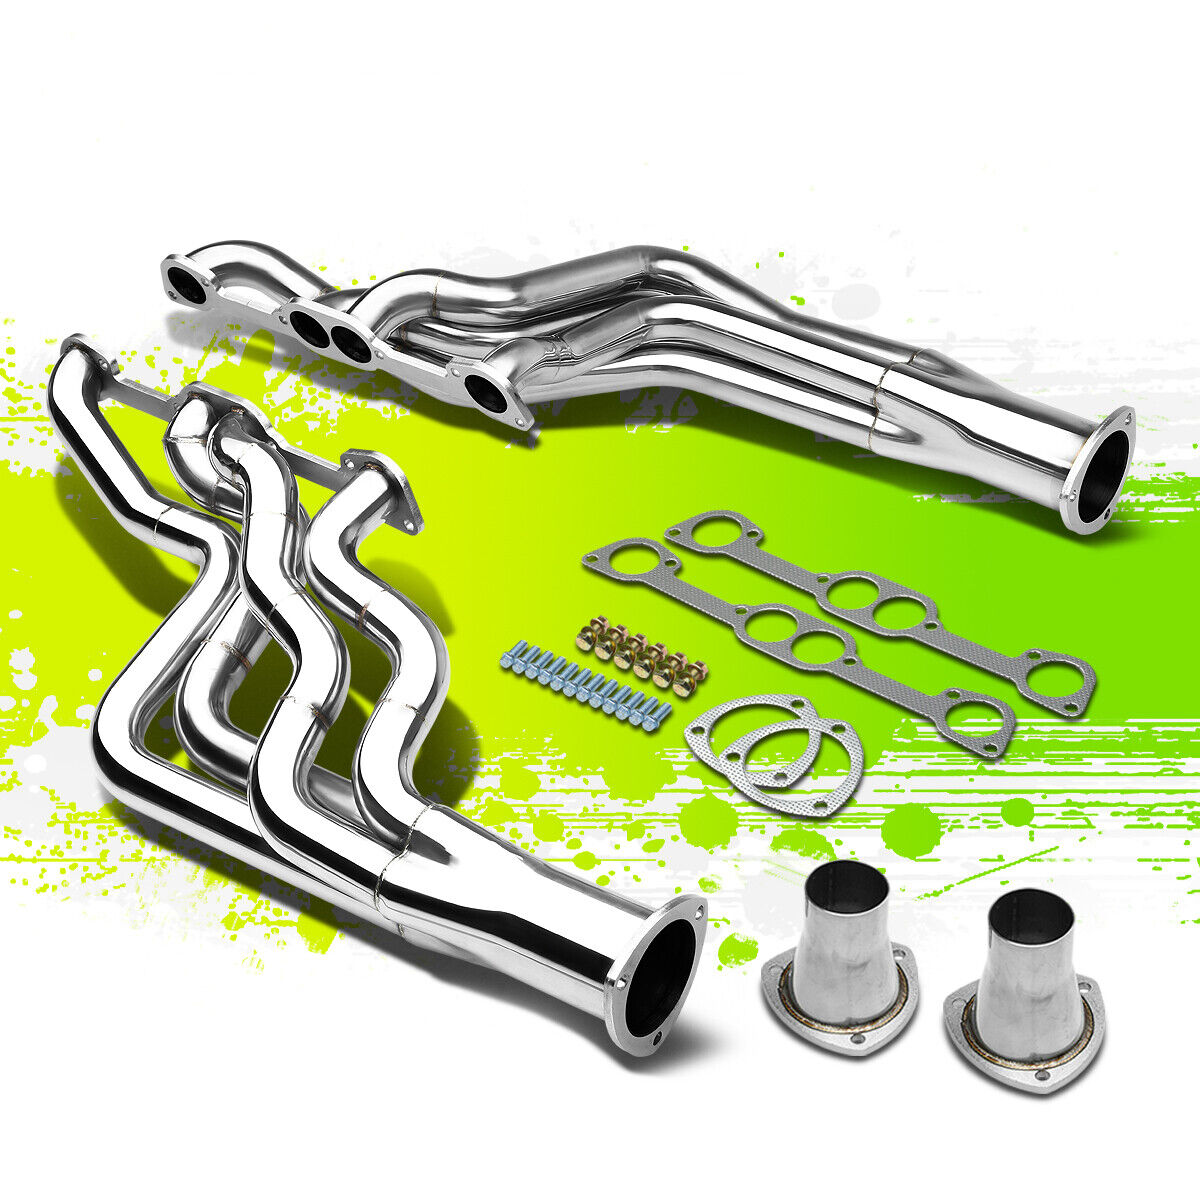 FOR 64-79 GTO/LE MANS 326-455 STAINLESS LONG TUBE RACING HEADER MANIFOLD EXHAUST